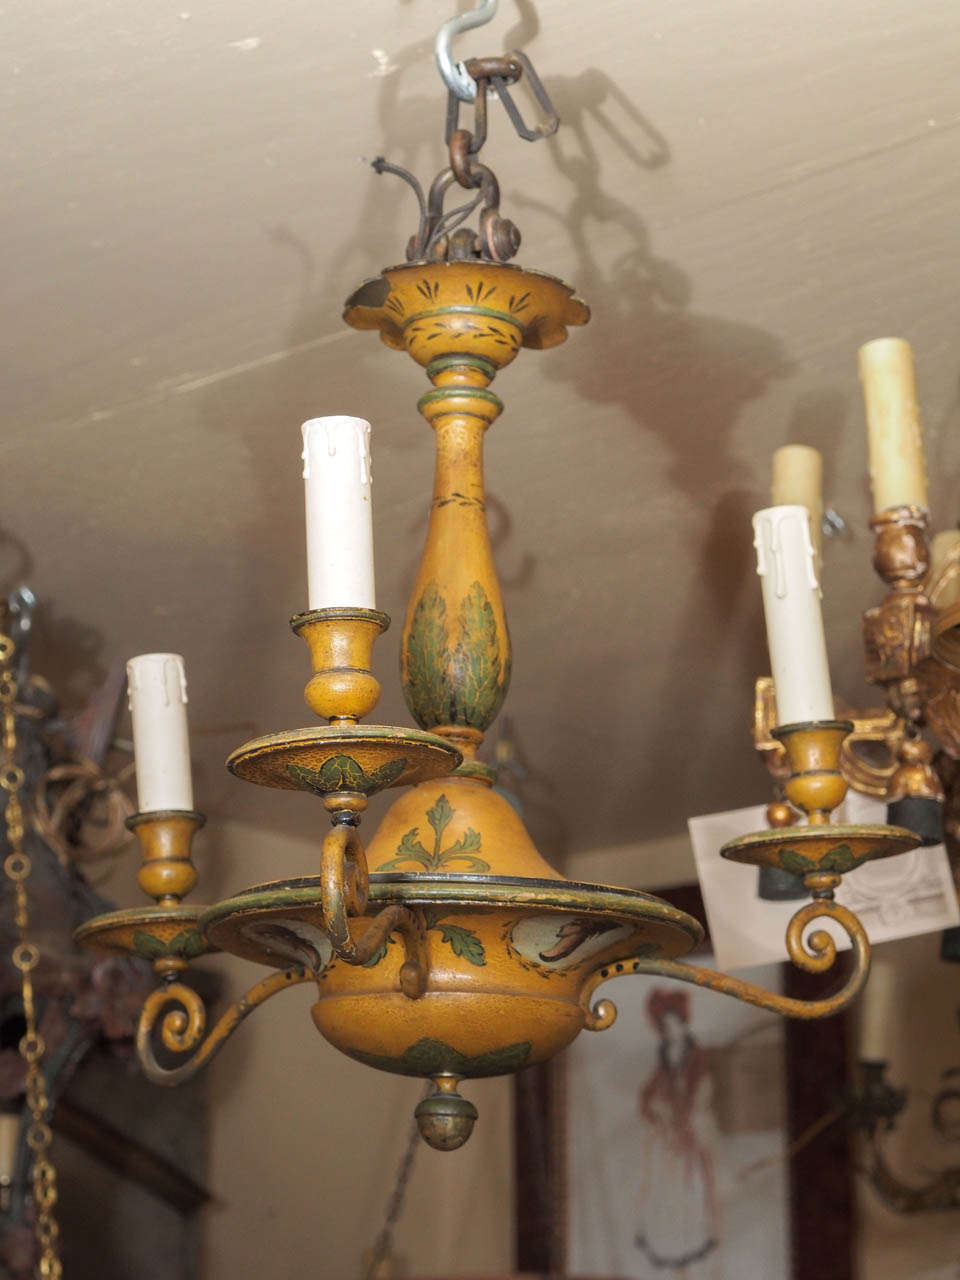 Charming 3 arm painted tole chandelier. Green and yellow with light colored cartouches of female profiles.